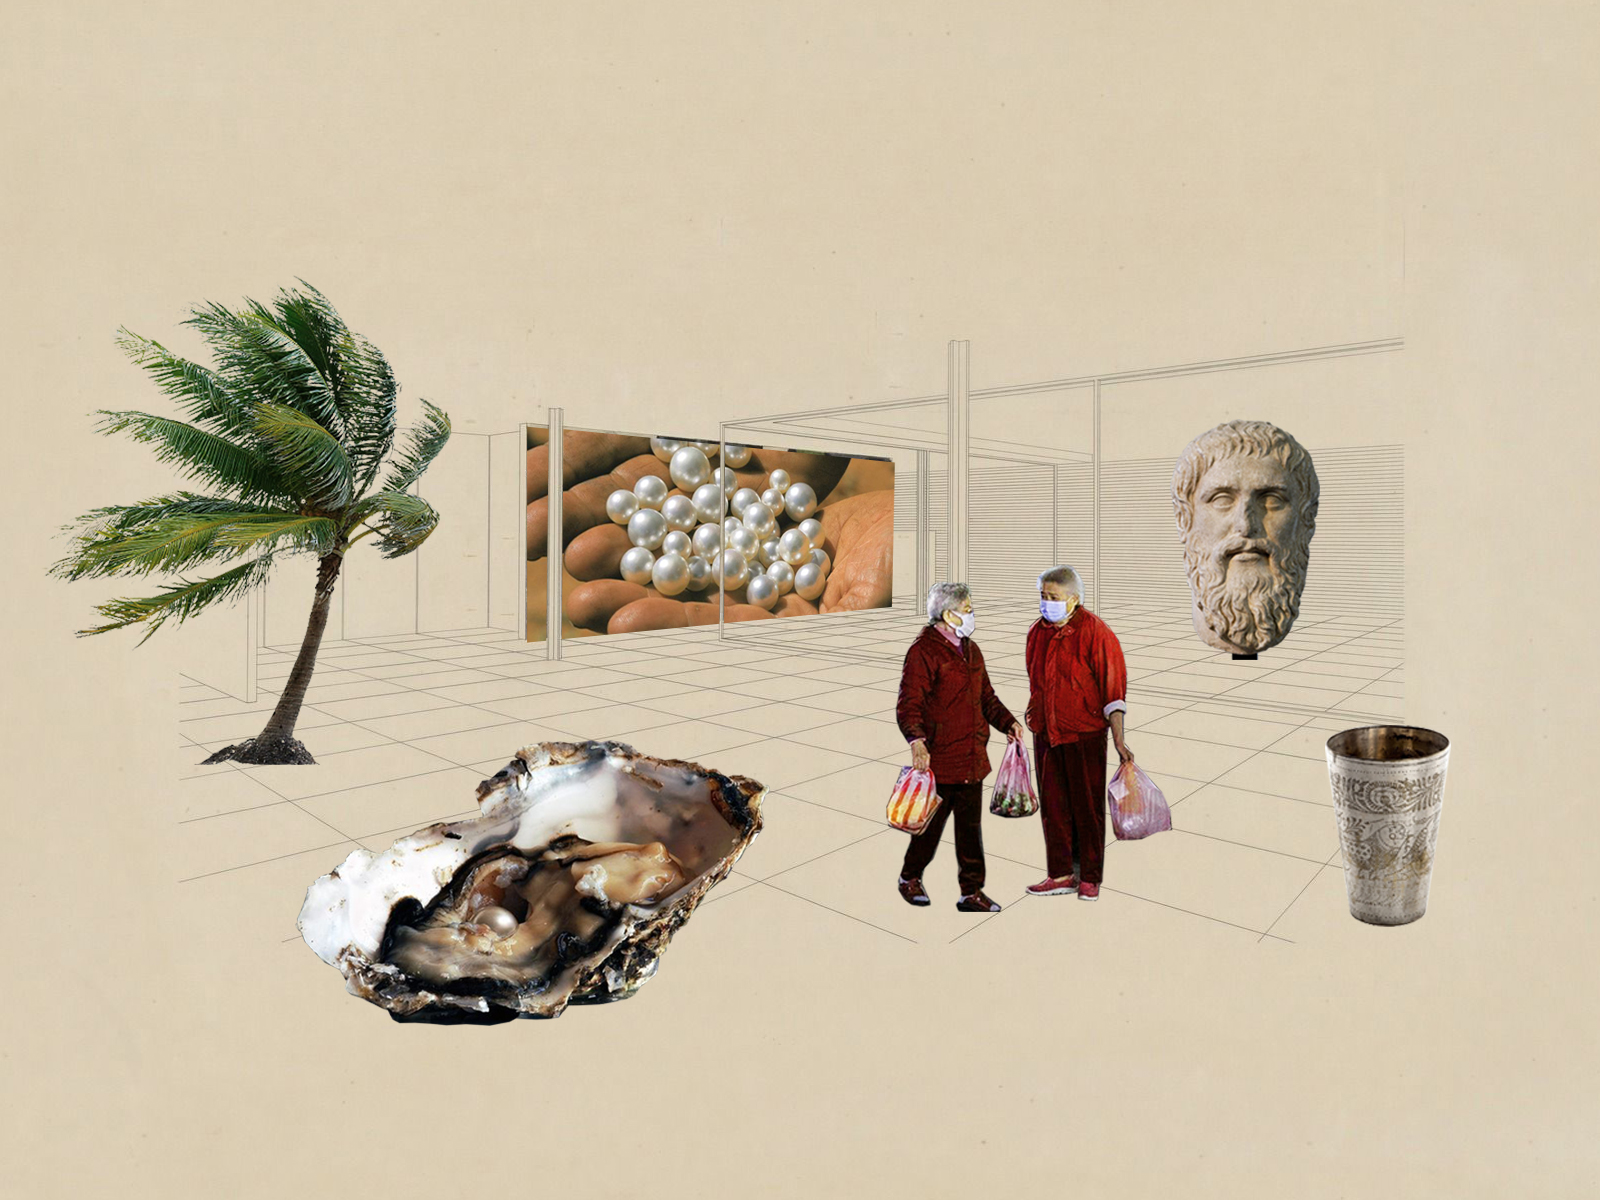 A photo collage on a beige background that includes an elderly couple holding trash bags, the stone face of an ancient roman statue, a palm tree blowing in the wind, and an oyster with a pearl in it.